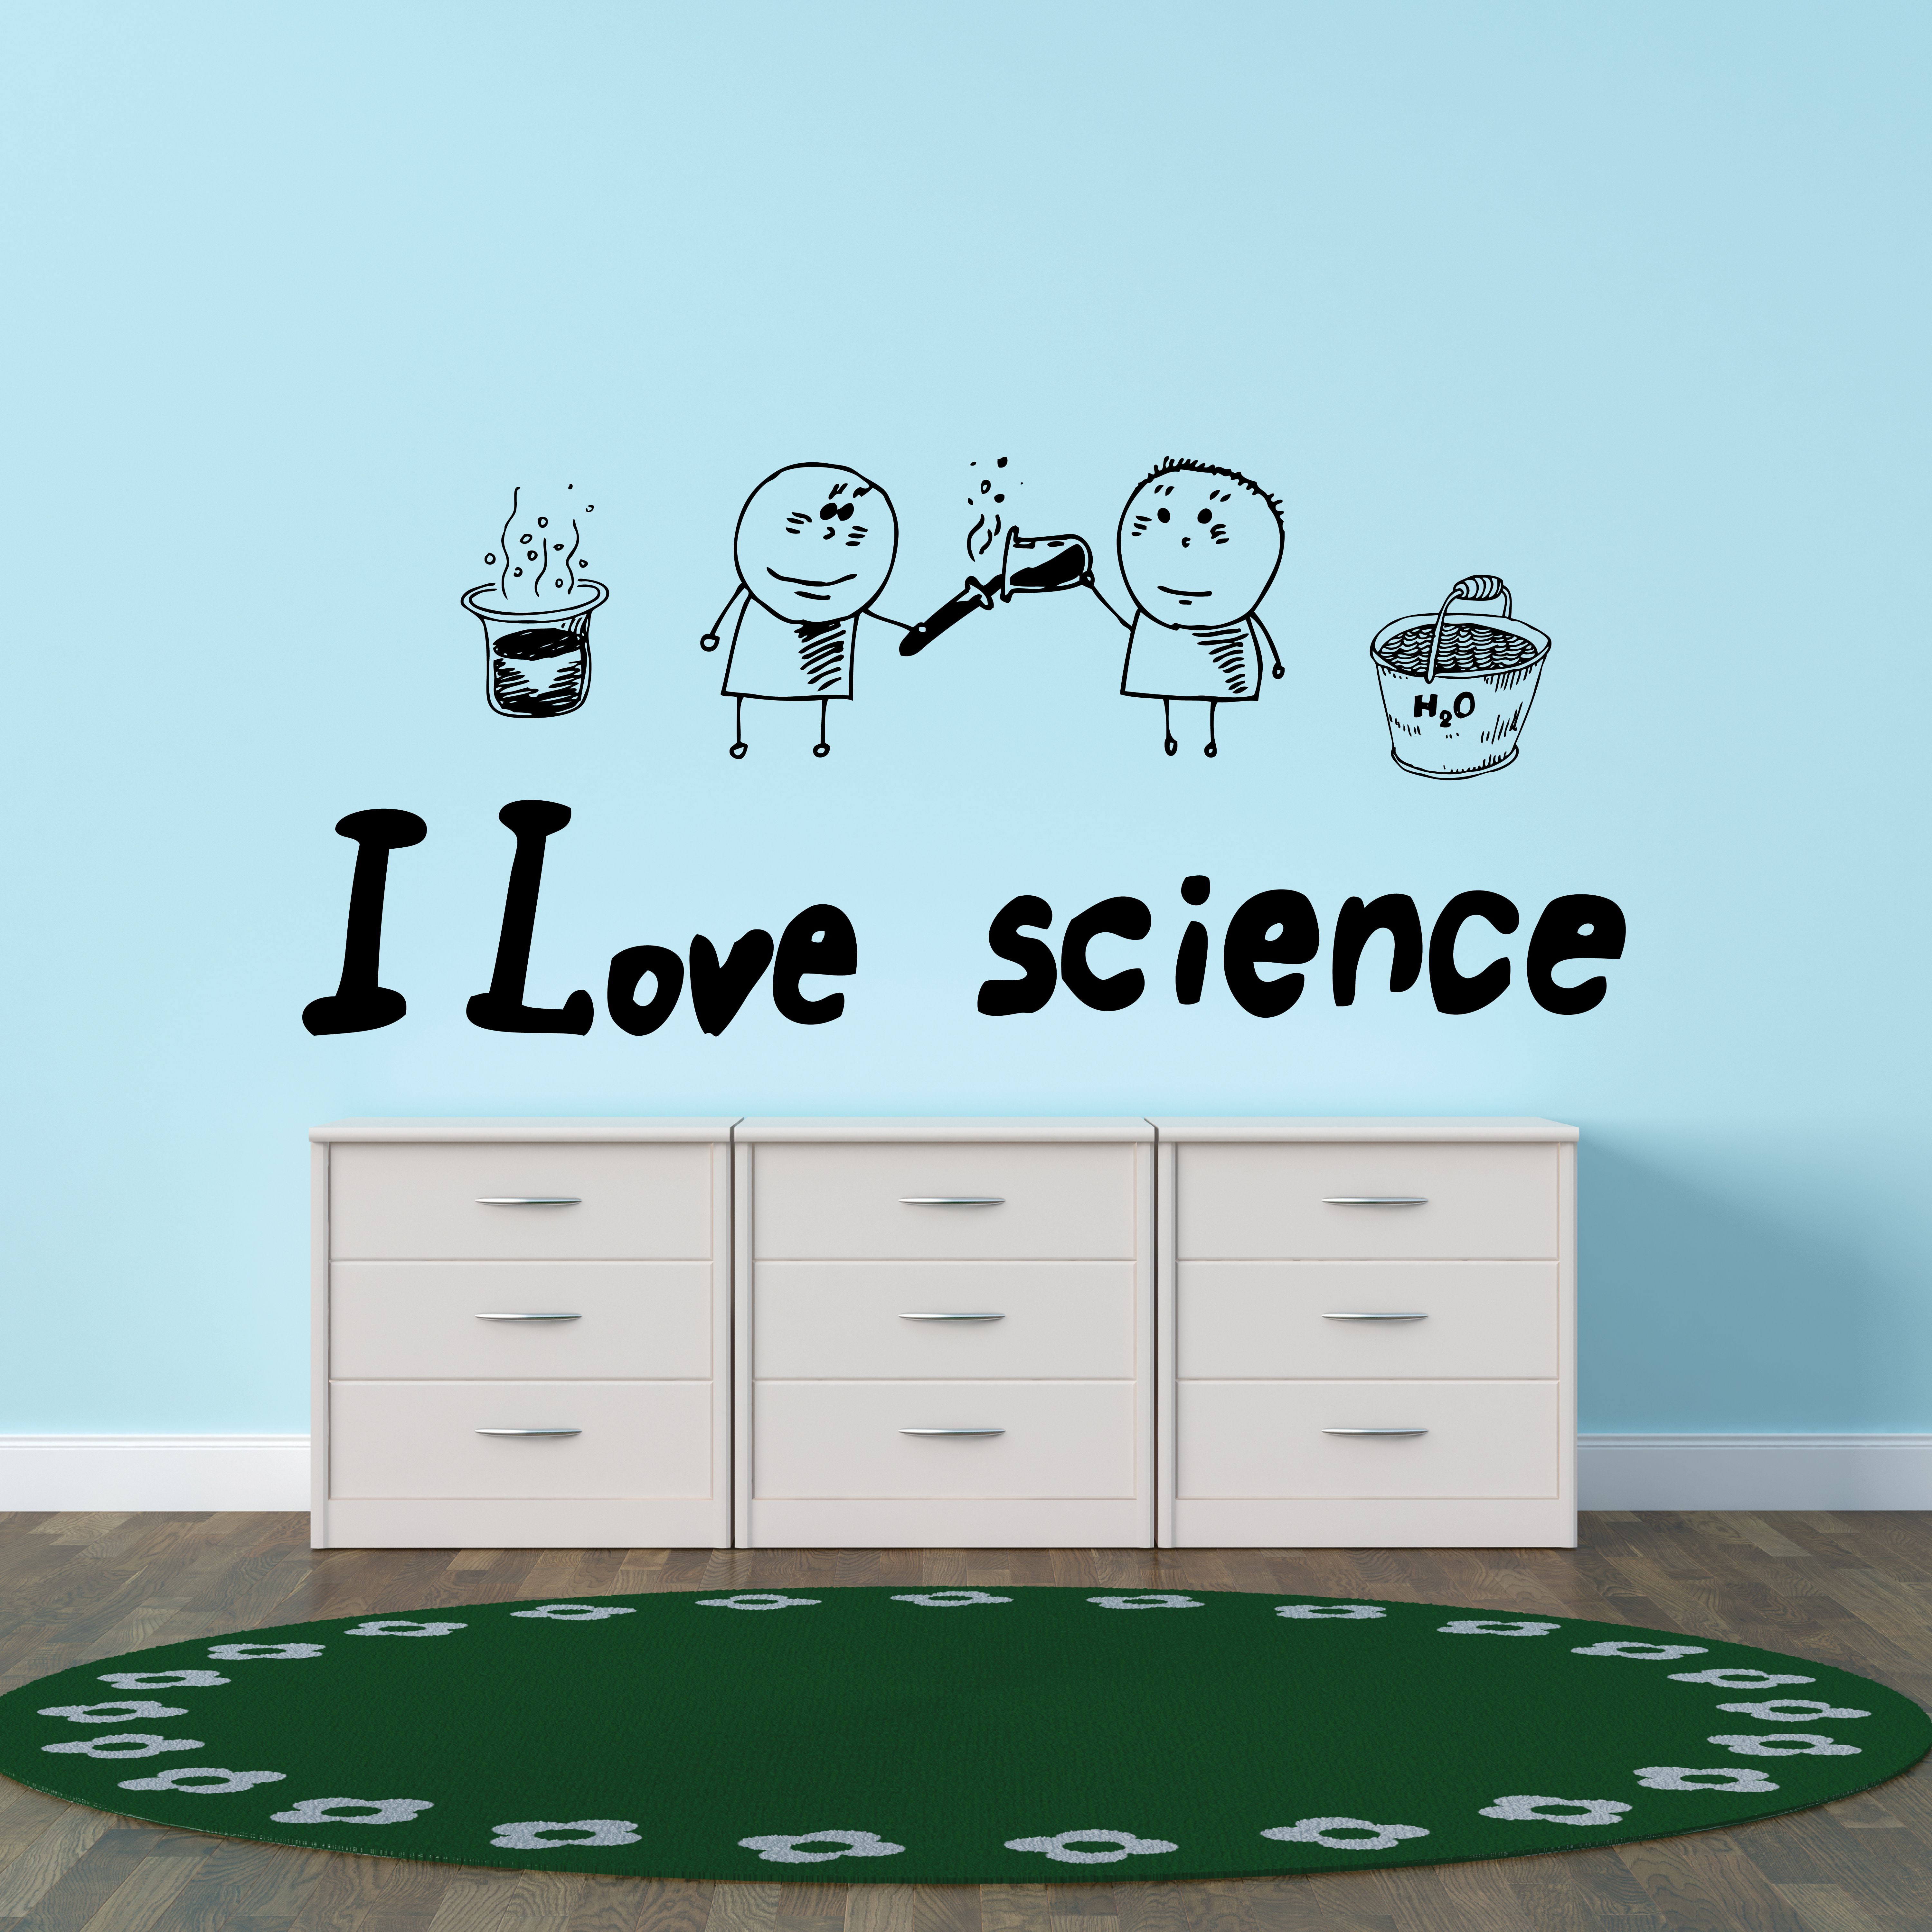 5 Classroom Decor Ideas for the Science Classroom - Teaching Muse